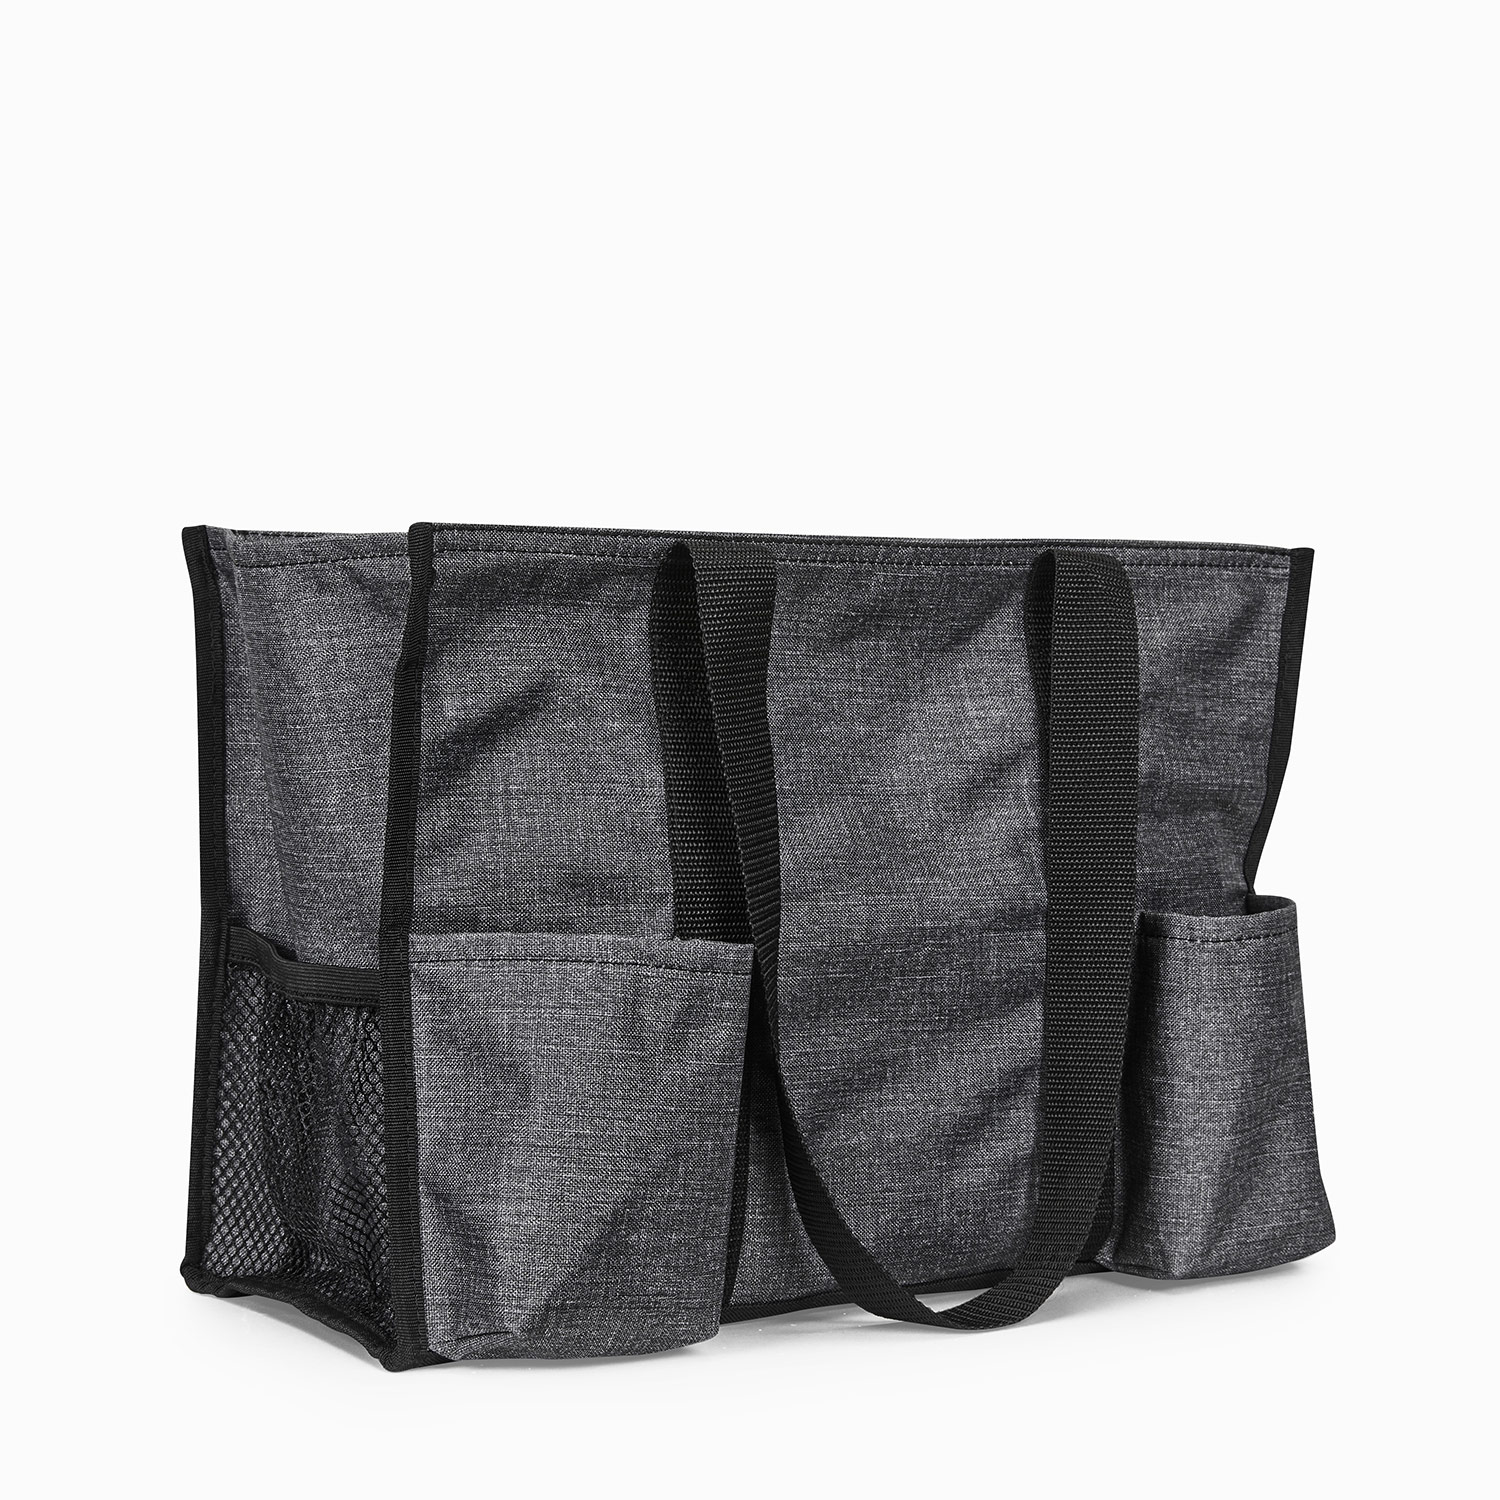 New Thirty One Zip-Top Organizing Utility Tote Dot Trio